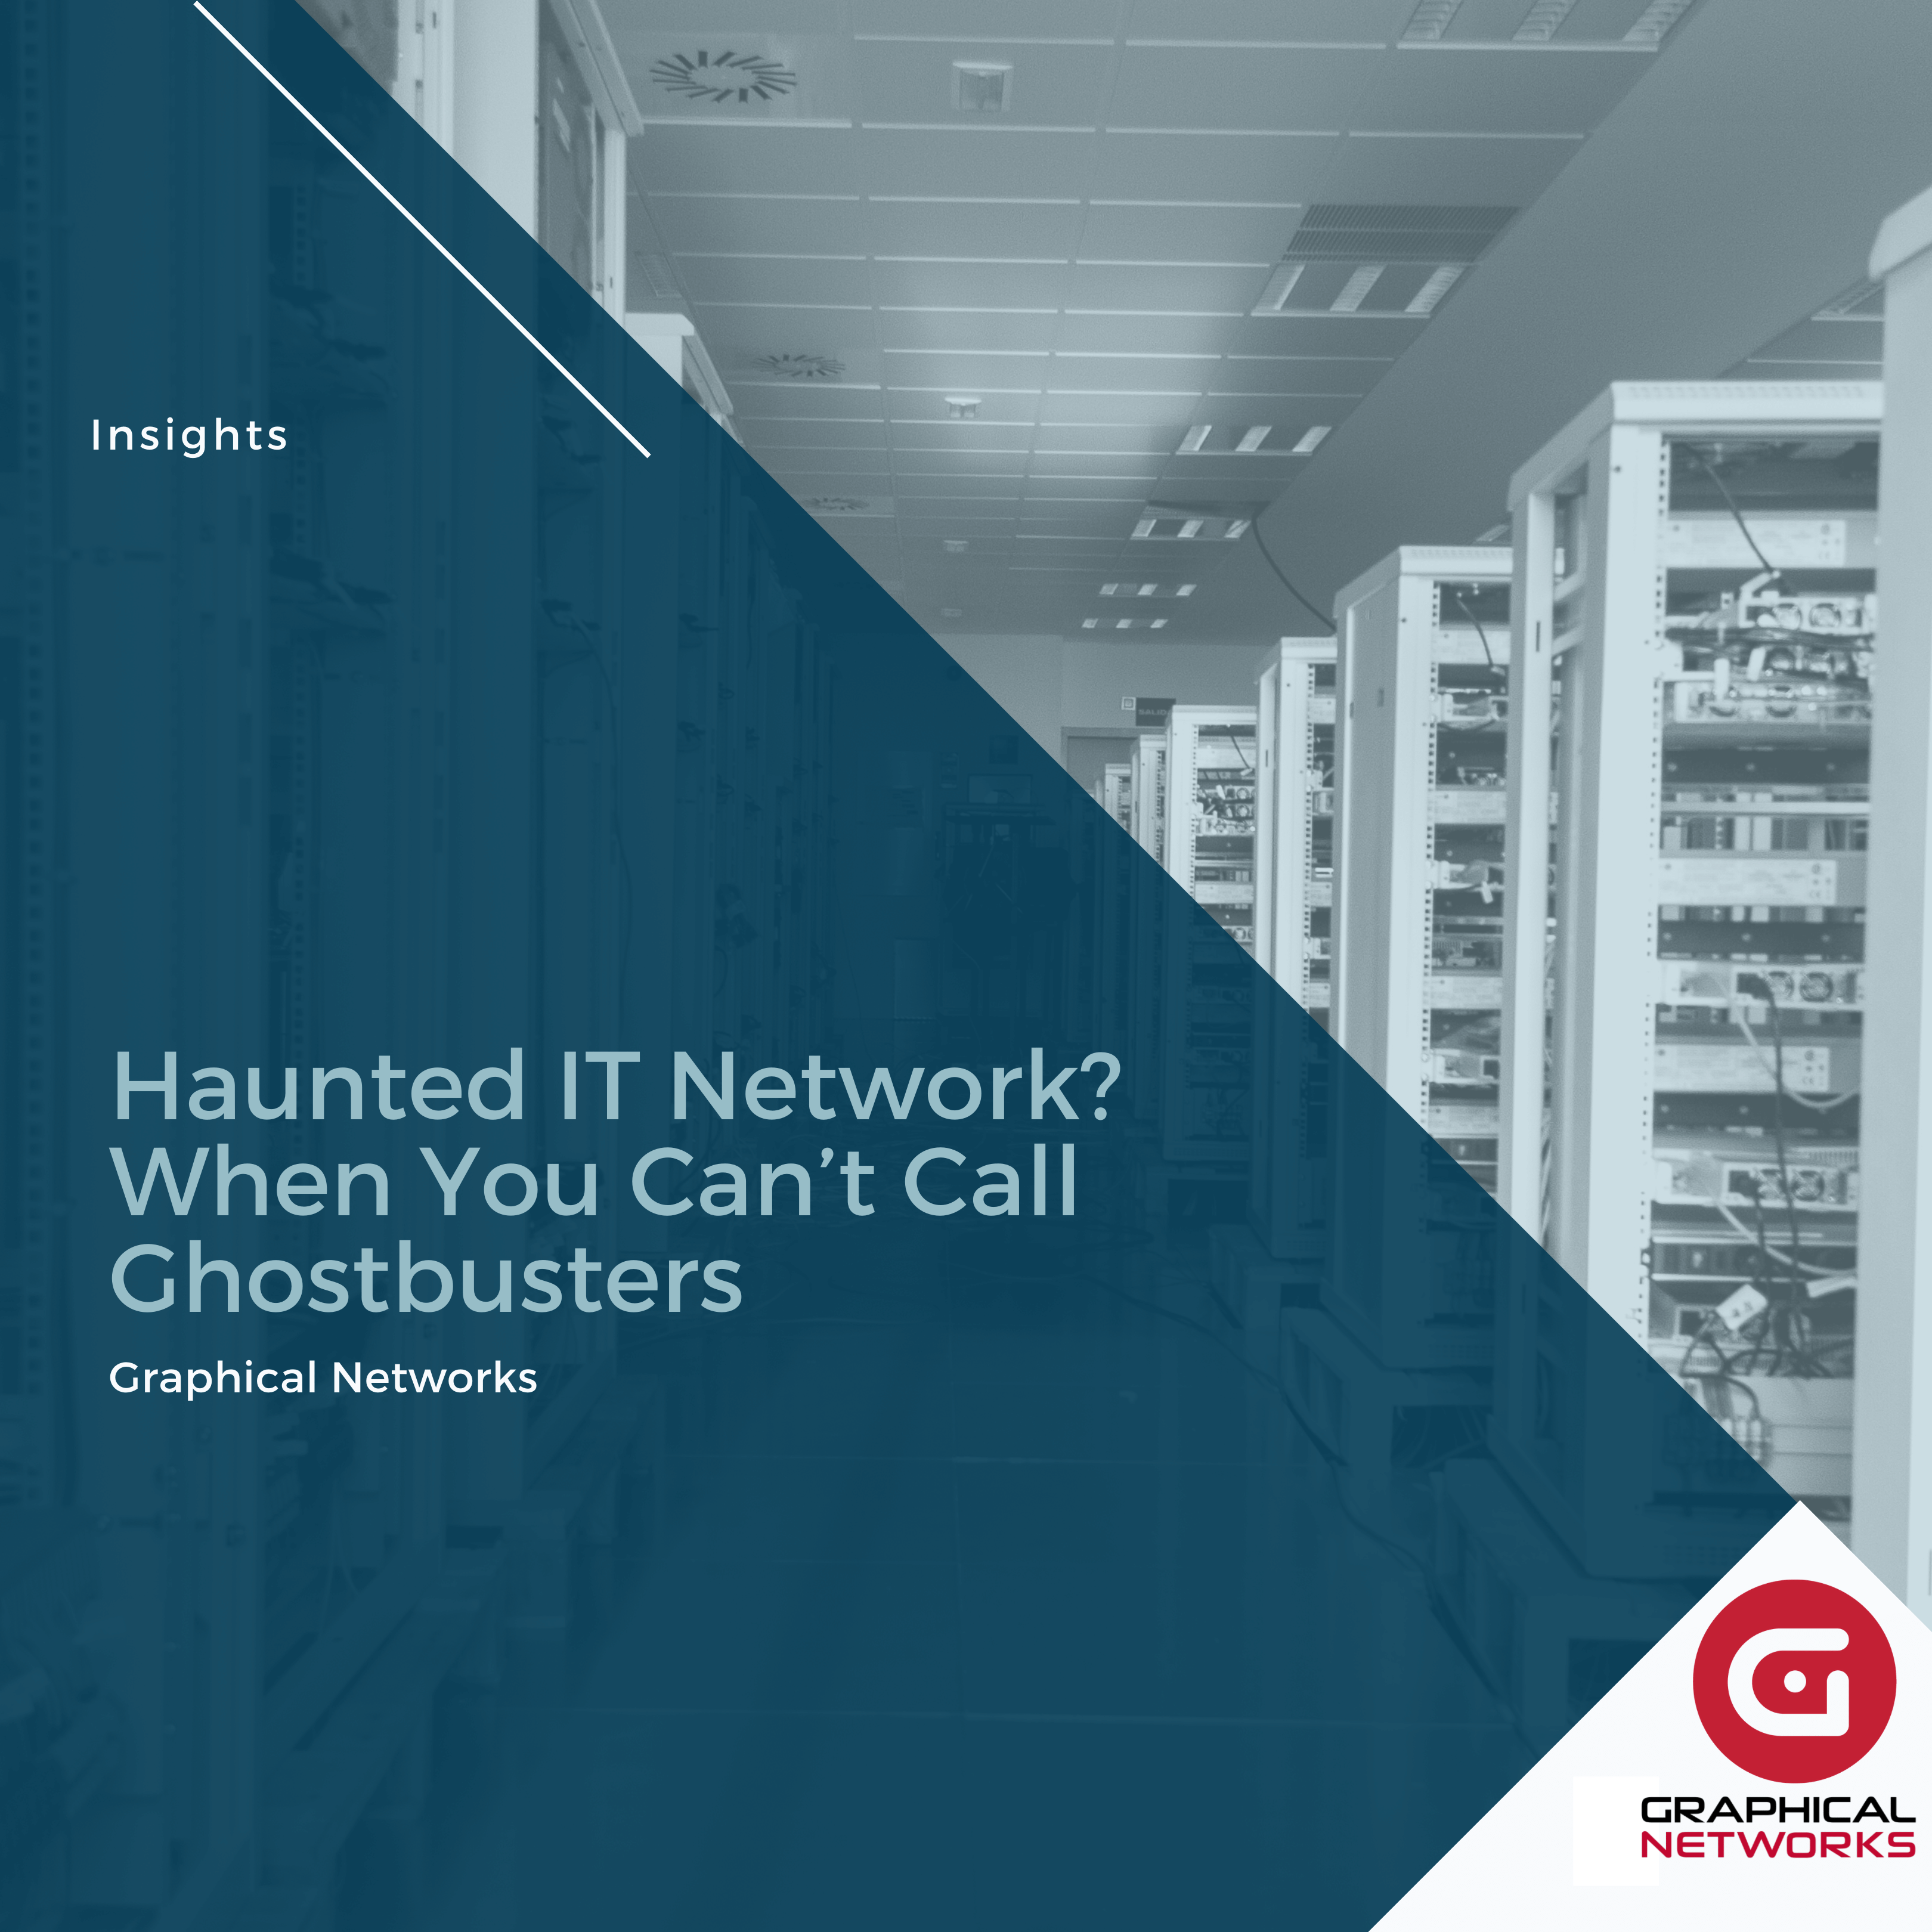 Haunted IT Network? When You Can’t Call Ghostbusters